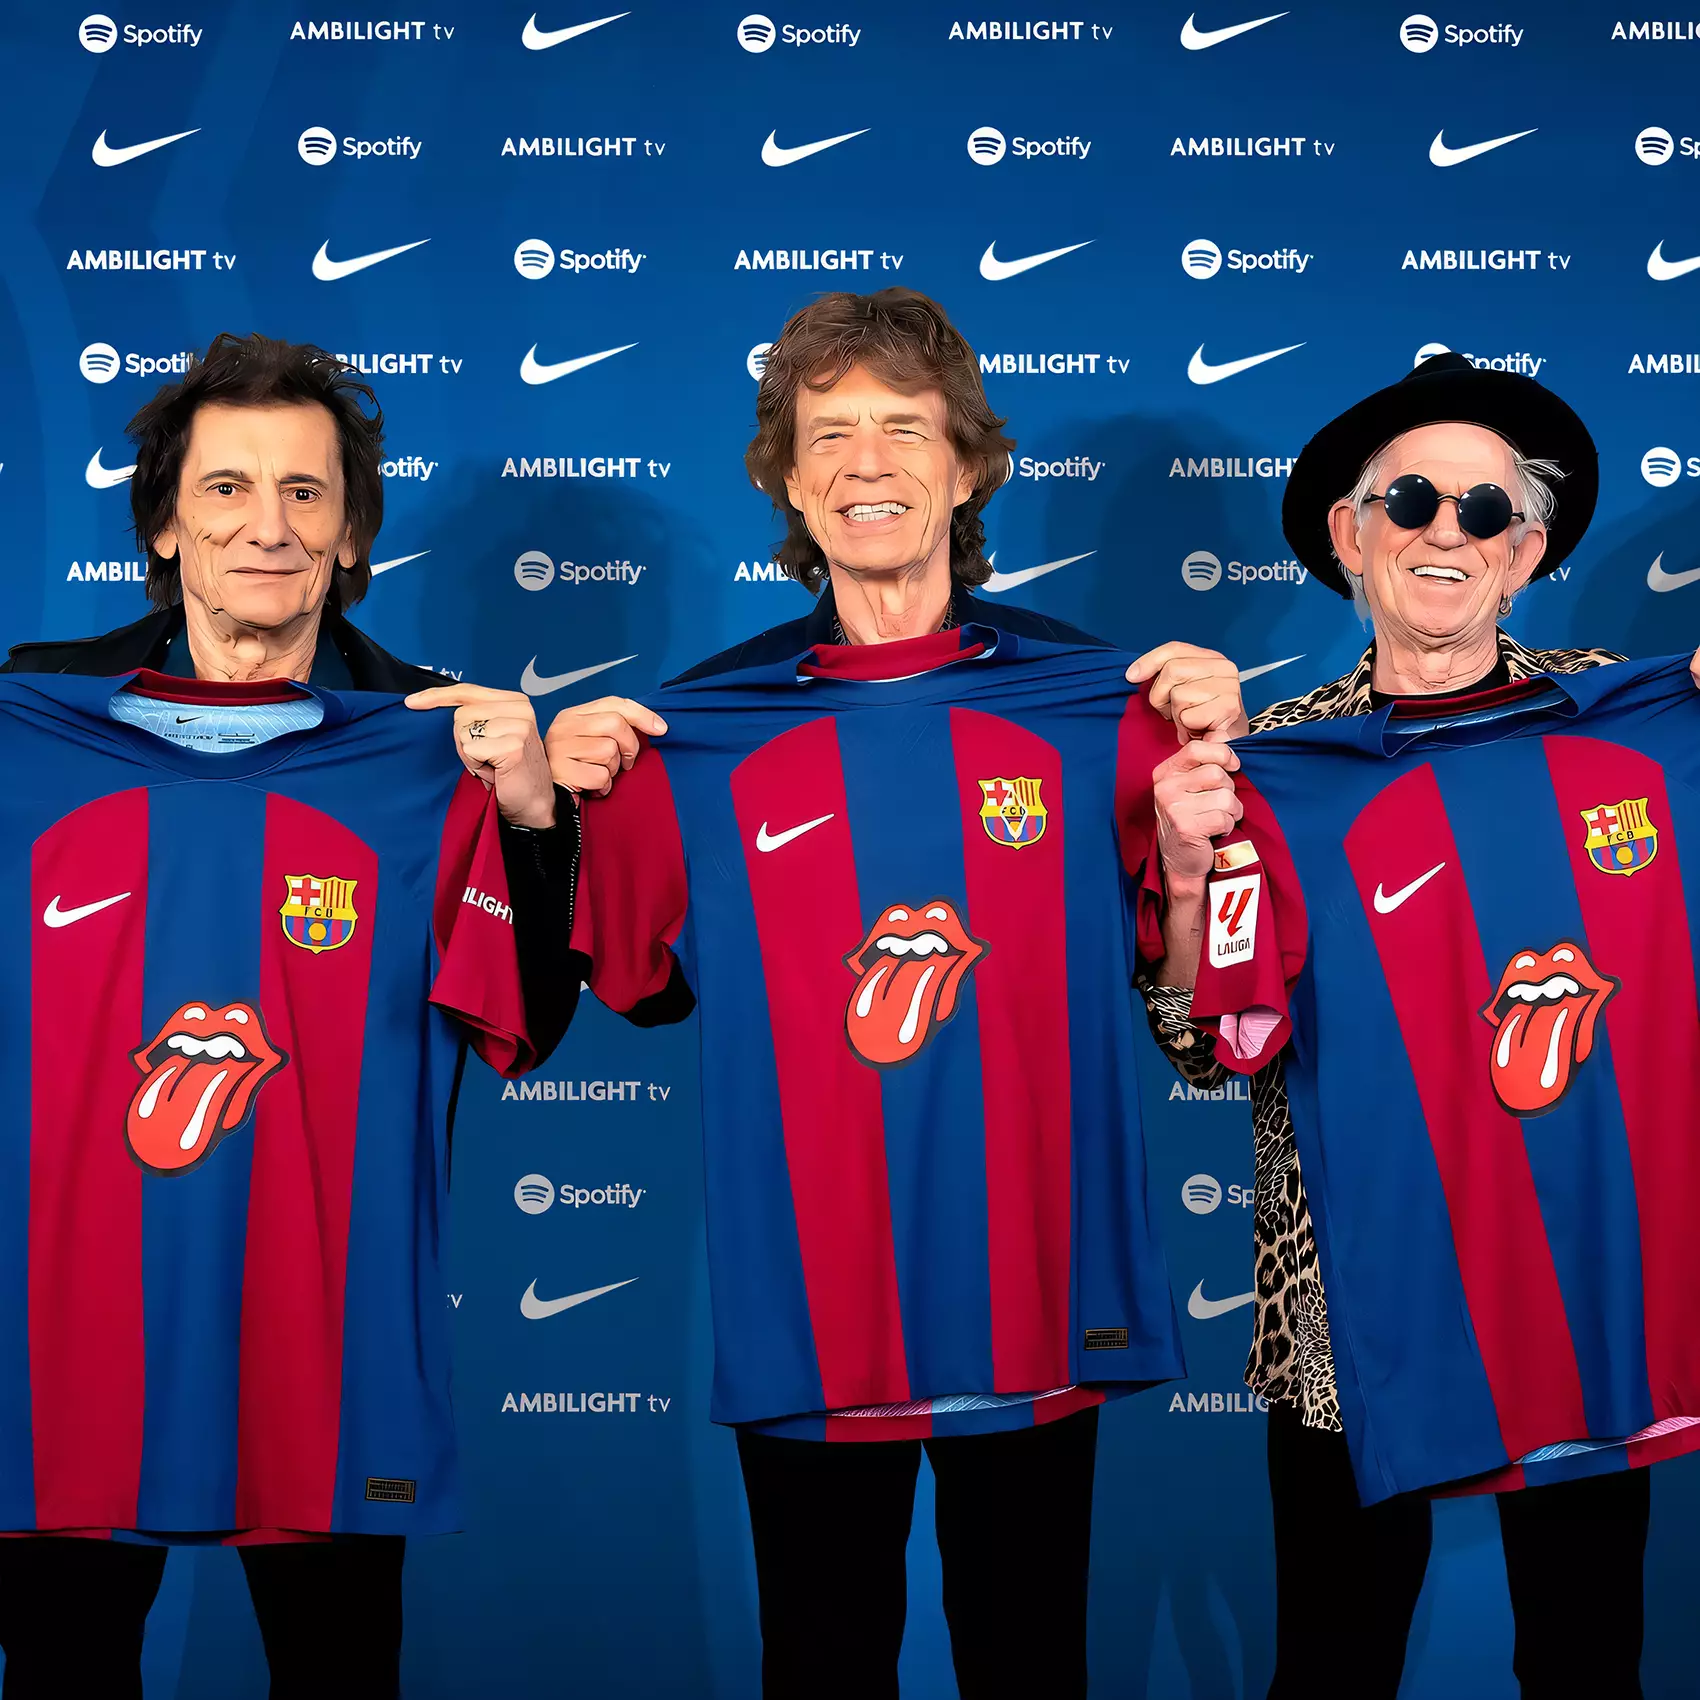 FC Barcelona Embraces The Rolling Stones Vibe for El Clásico Showdown with Real Madrid